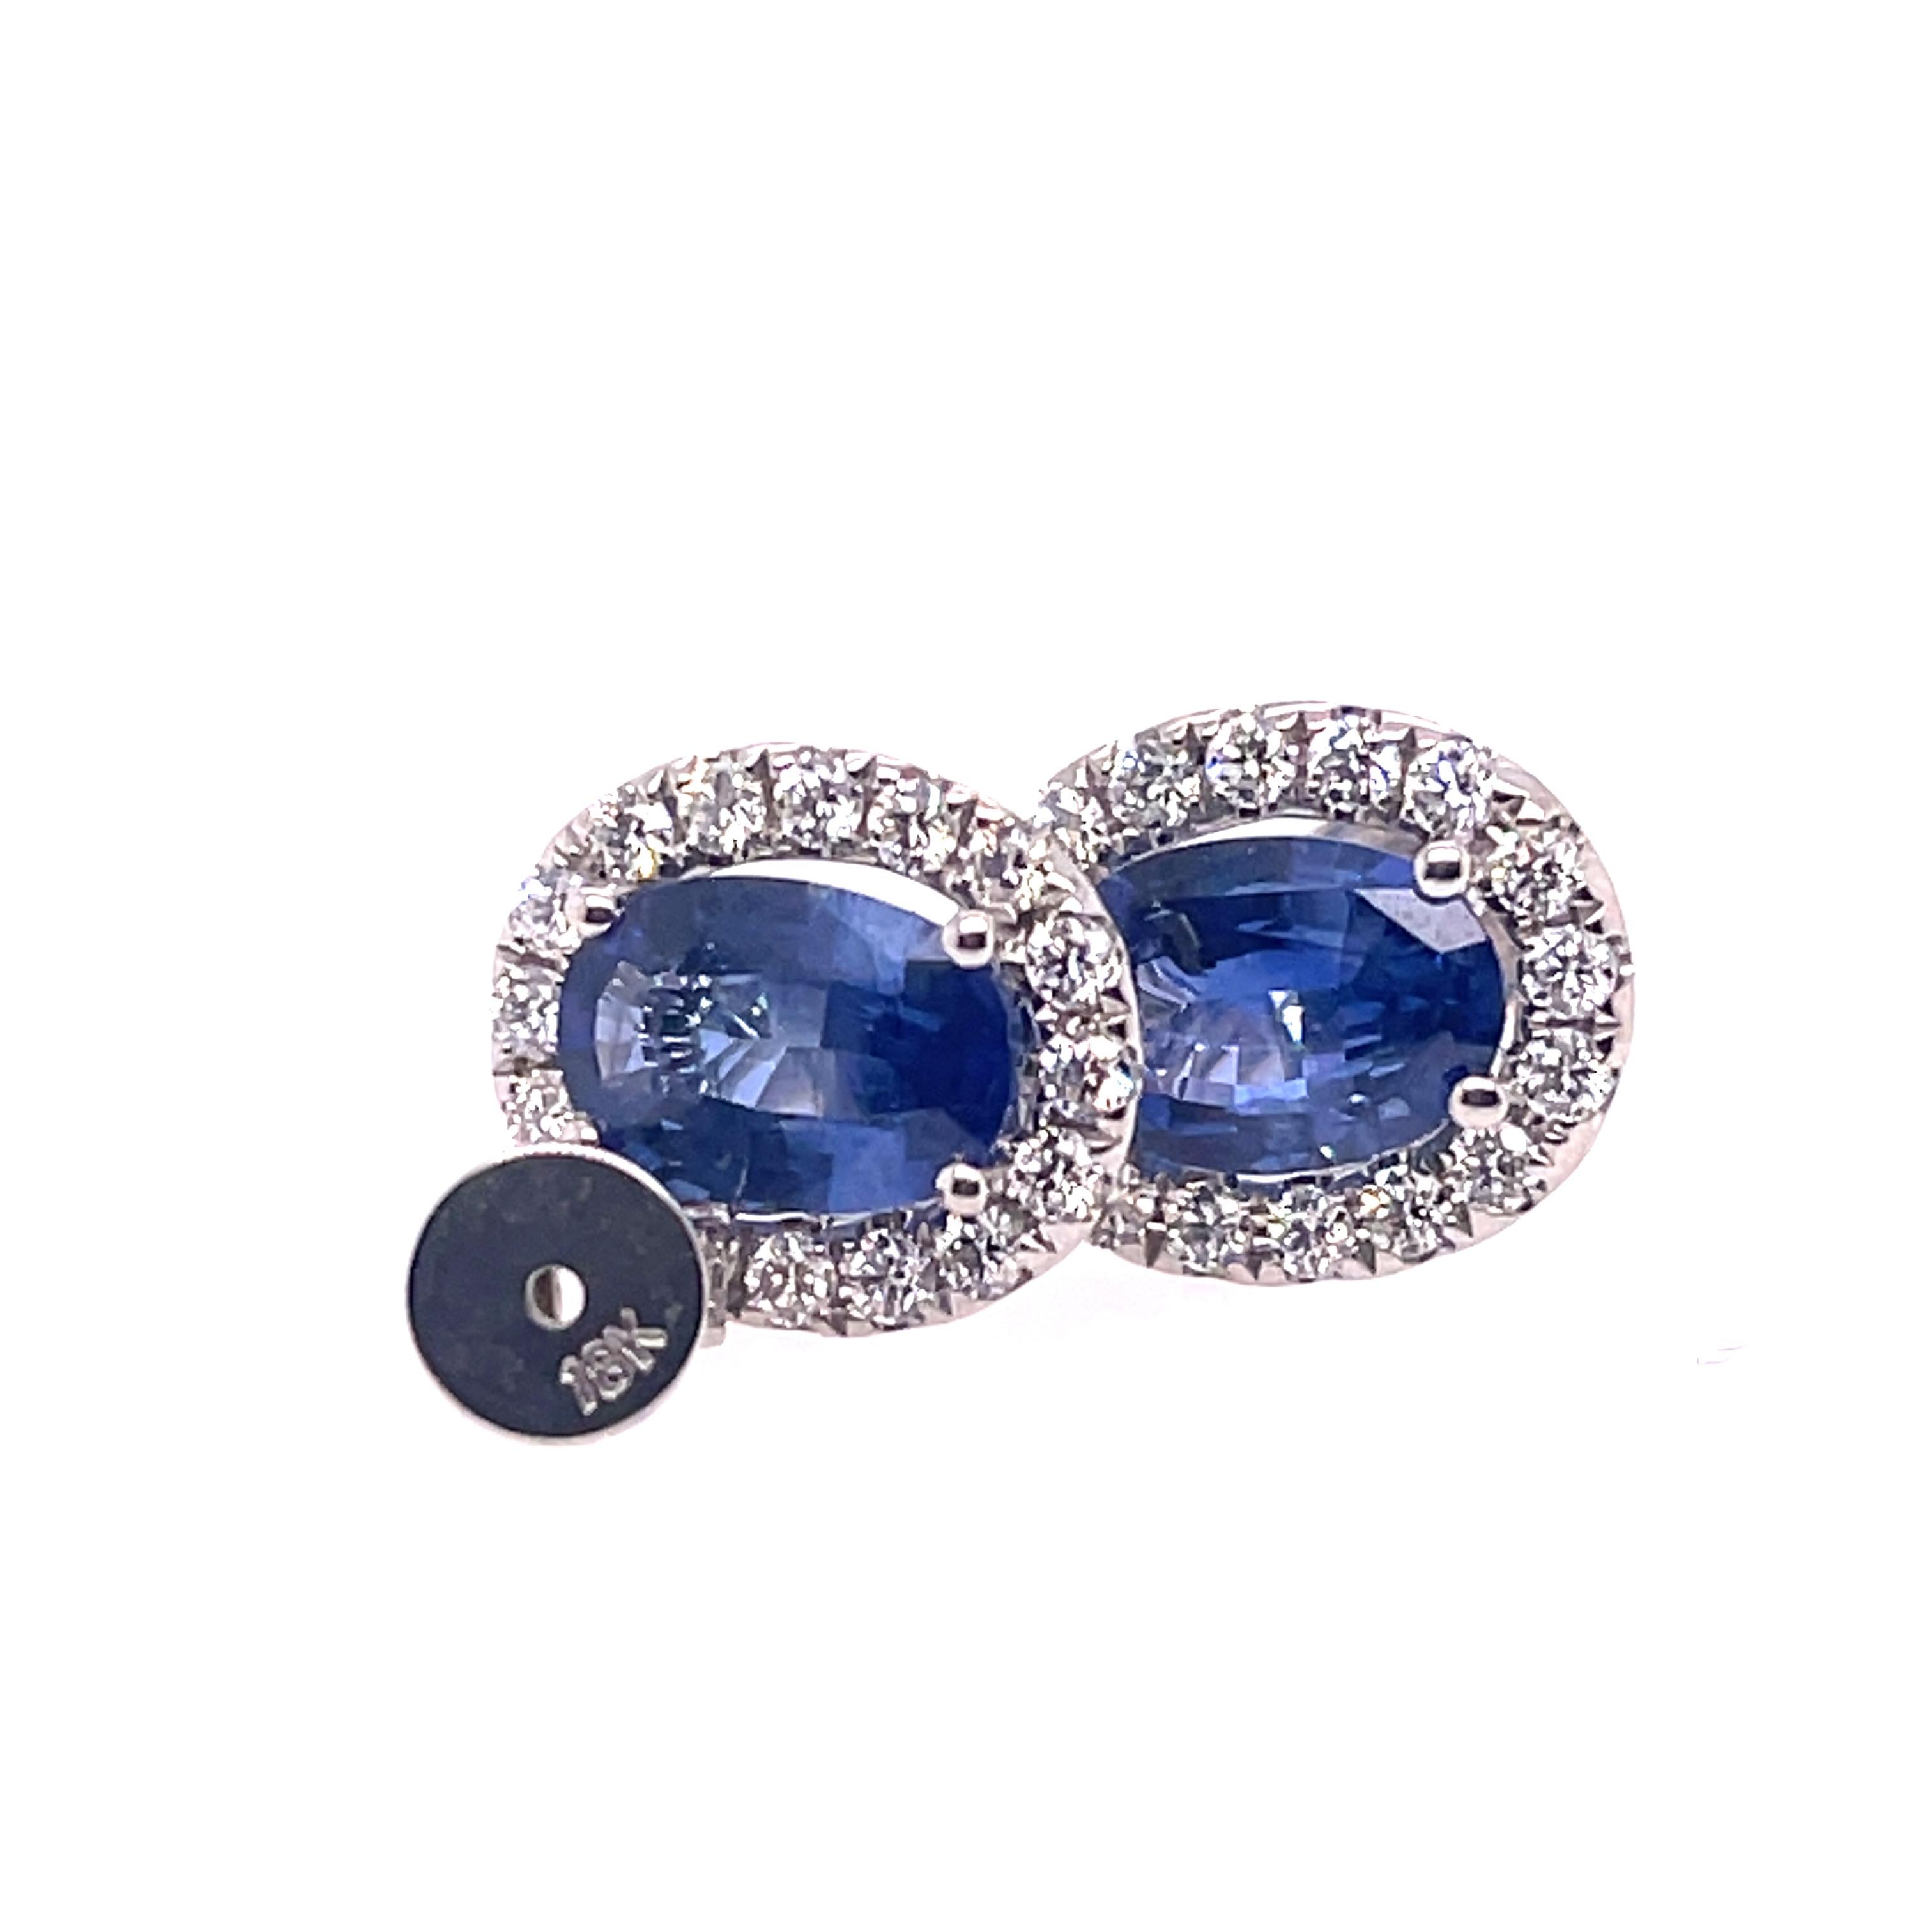 Sapphire and diamond studs in 18K white gold. The earrings feature oval sapphires that measure 8mmx 6mm and have a halo of round diamonds. 